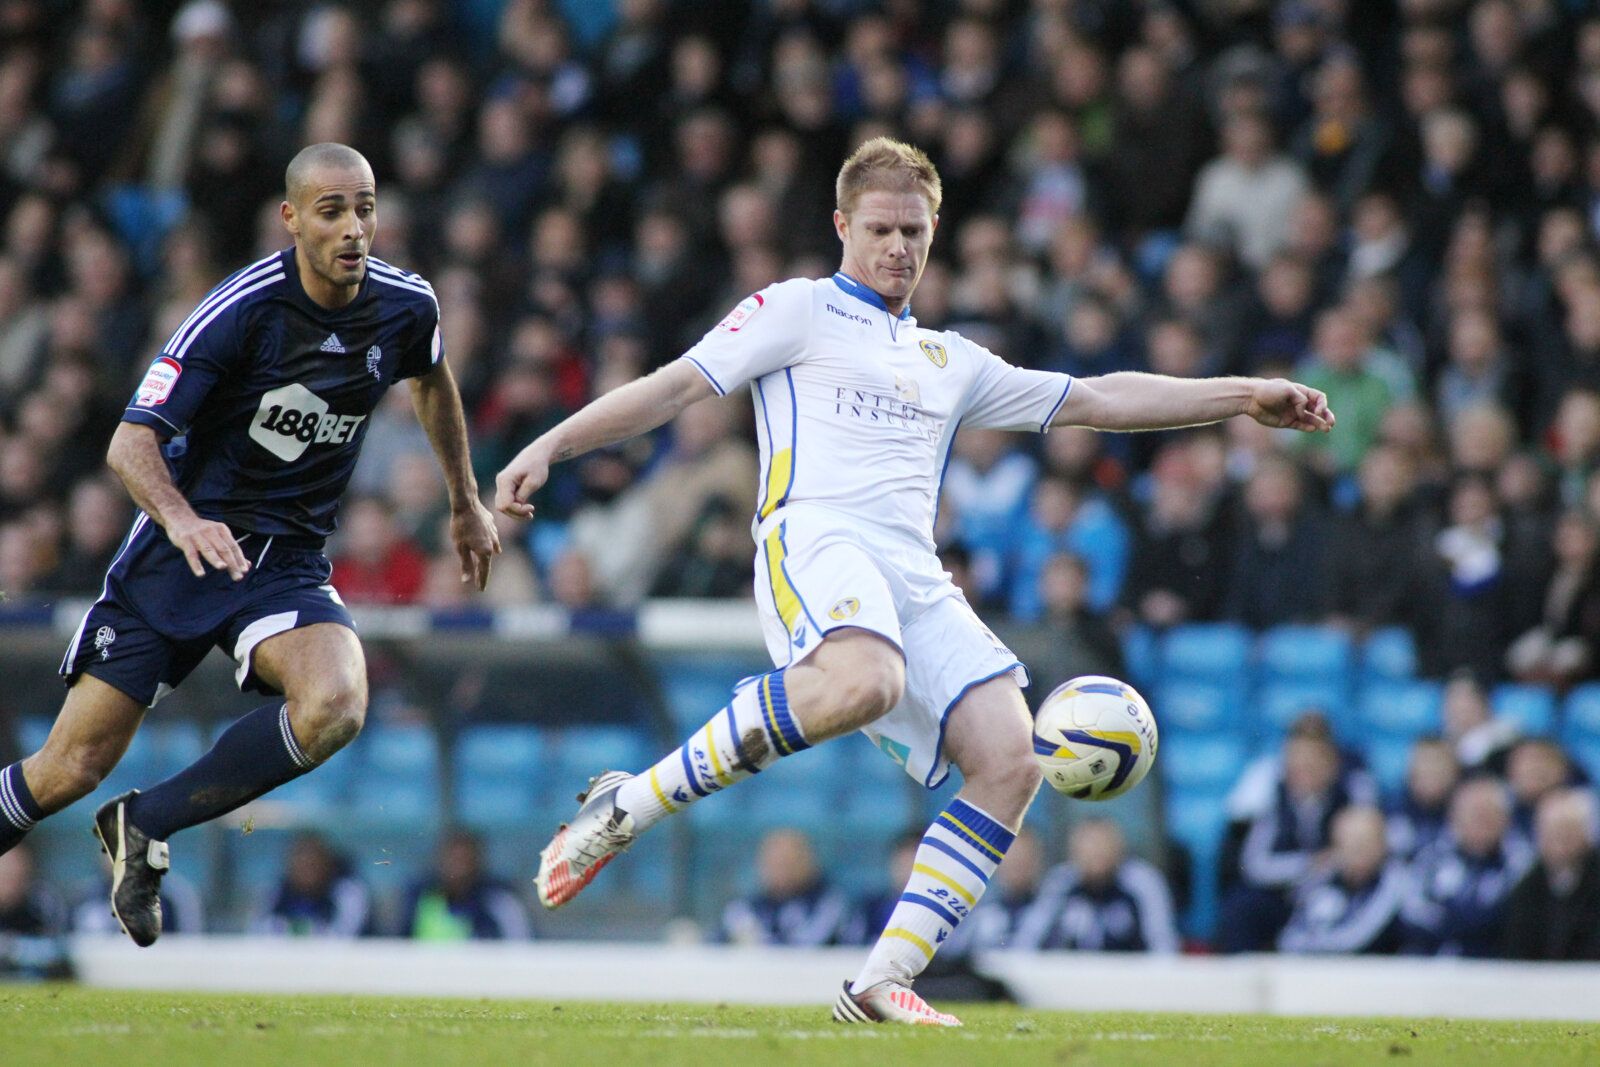 Football - Leeds United v Bolton Wanderers - npower Football League Championship - Elland Road - 12/13 , 1/1/13 
Alan Tate  - Leeds United in action against Darren Pratley - Bolton Wanderers 
Mandatory Credit: Action Images / Ed Sykes 
EDITORIAL USE ONLY. No use with unauthorized audio, video, data, fixture lists, club/league logos or live services. Online in-match use limited to 45 images, no video emulation. No use in betting, games or single club/league/player publications.  Please contact yo